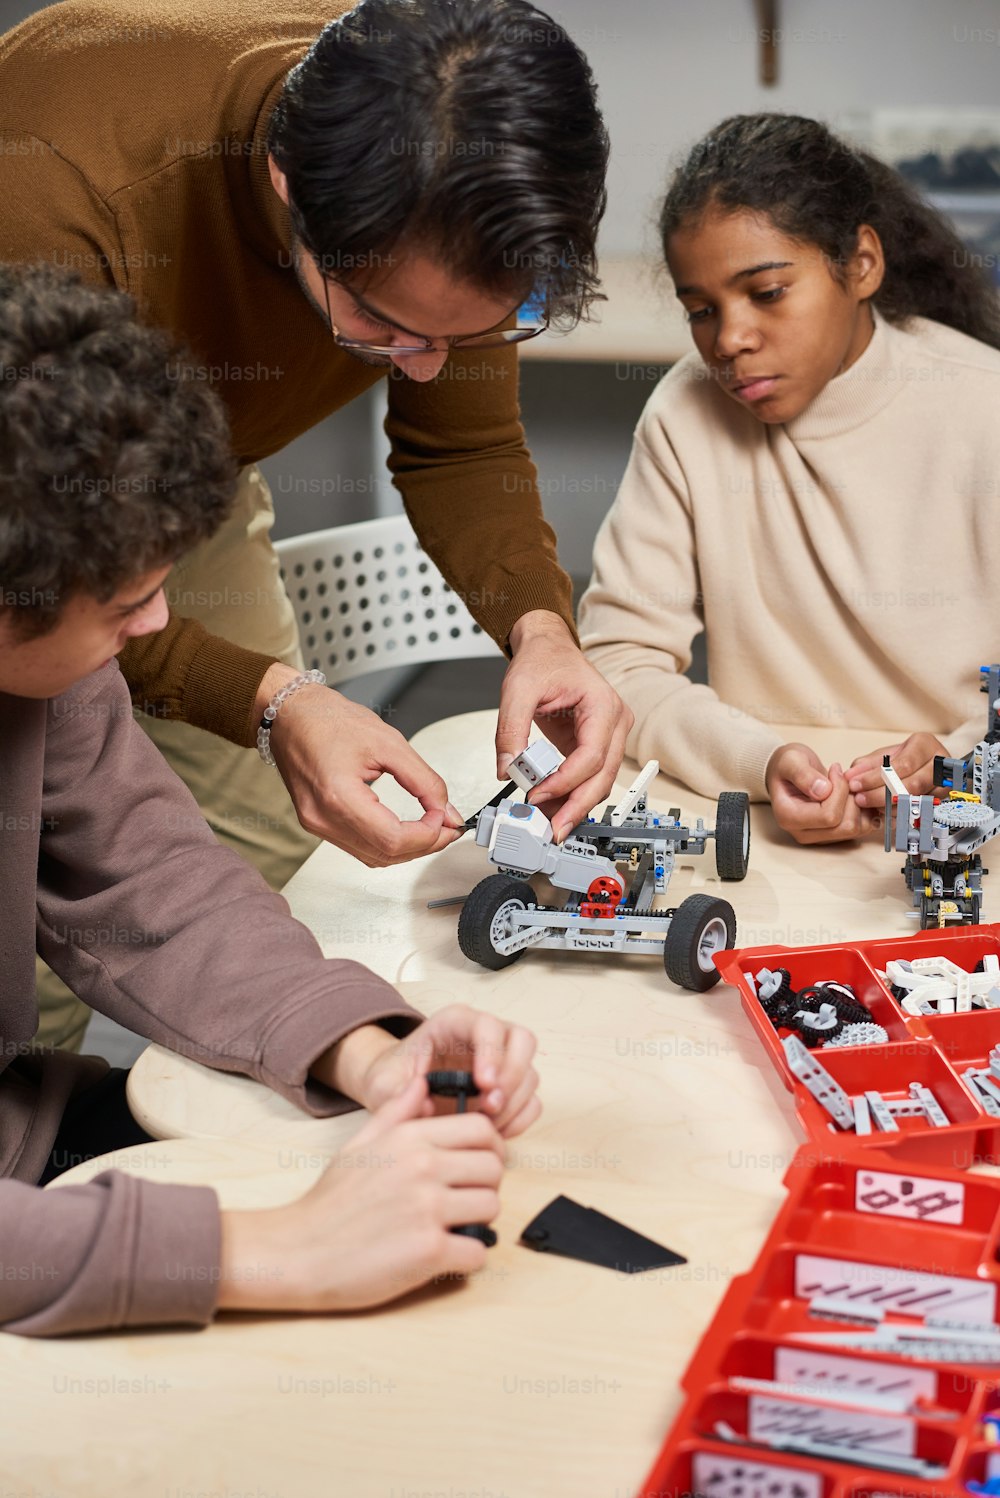 Young teacher showing to children how to build the robot car at the table during engineering lesson